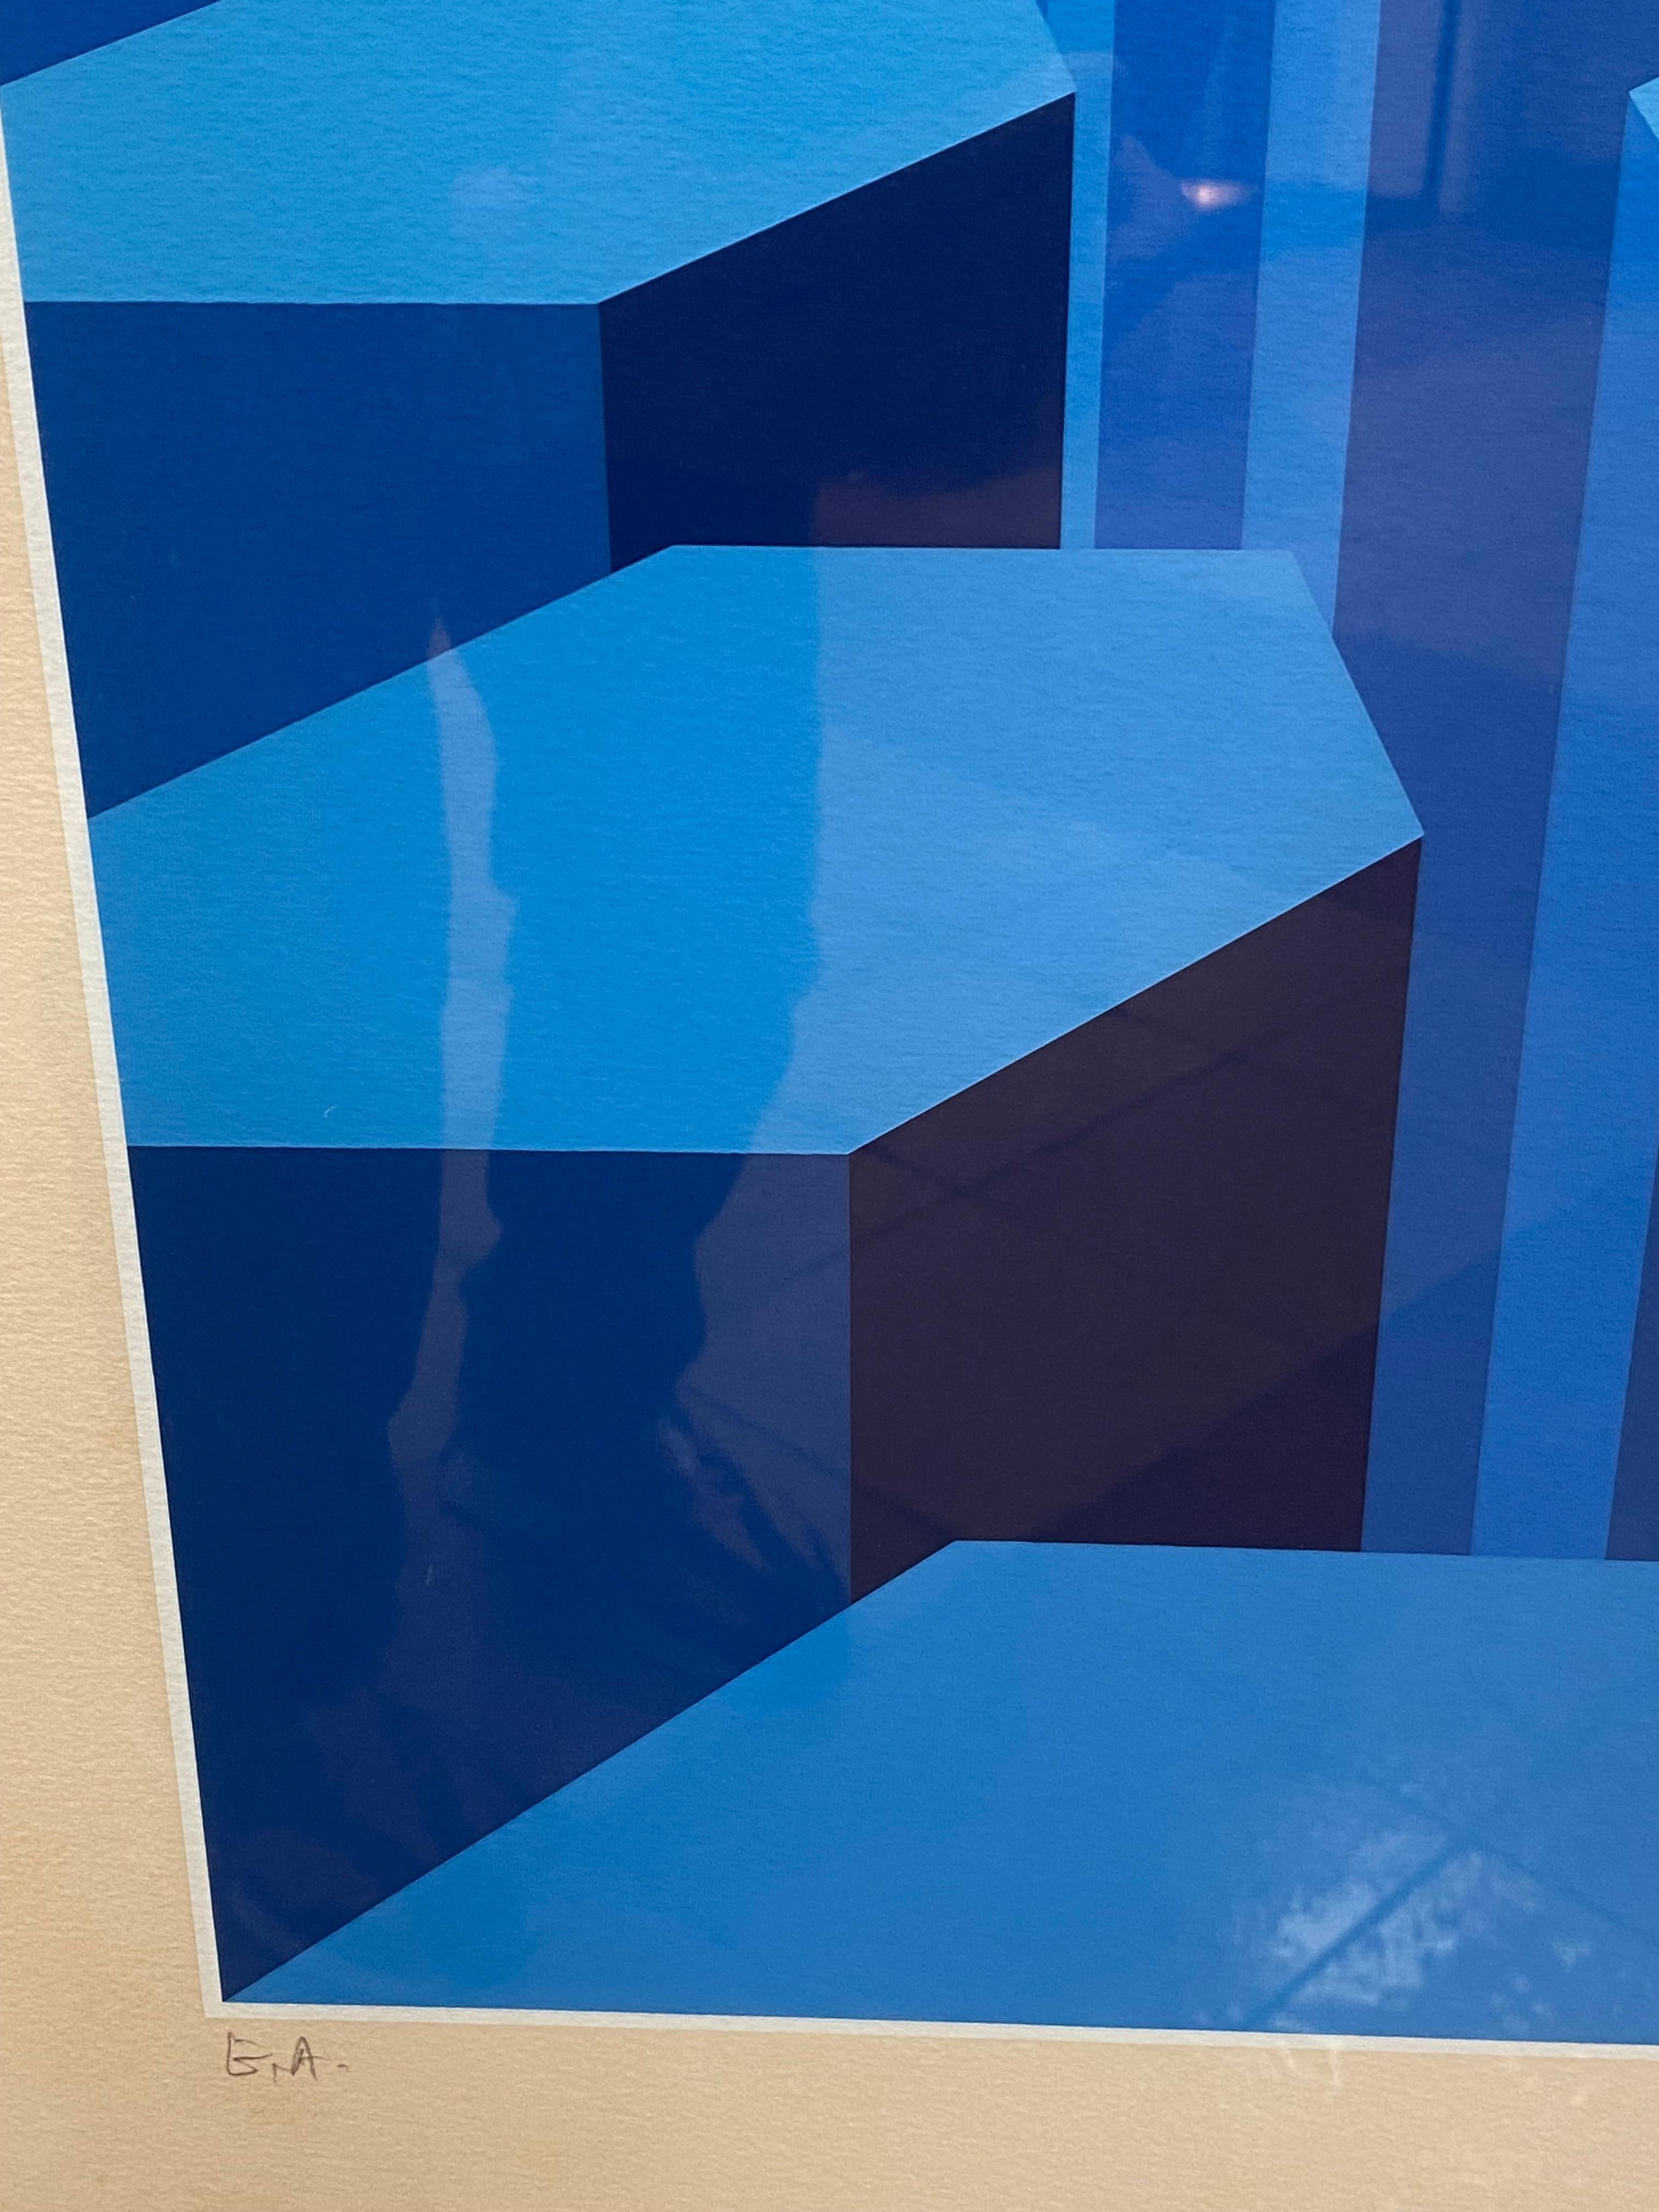 French Yvaral (Jean Pierre Vasarely) “So Shades of Blue” - Circa 1970 For Sale